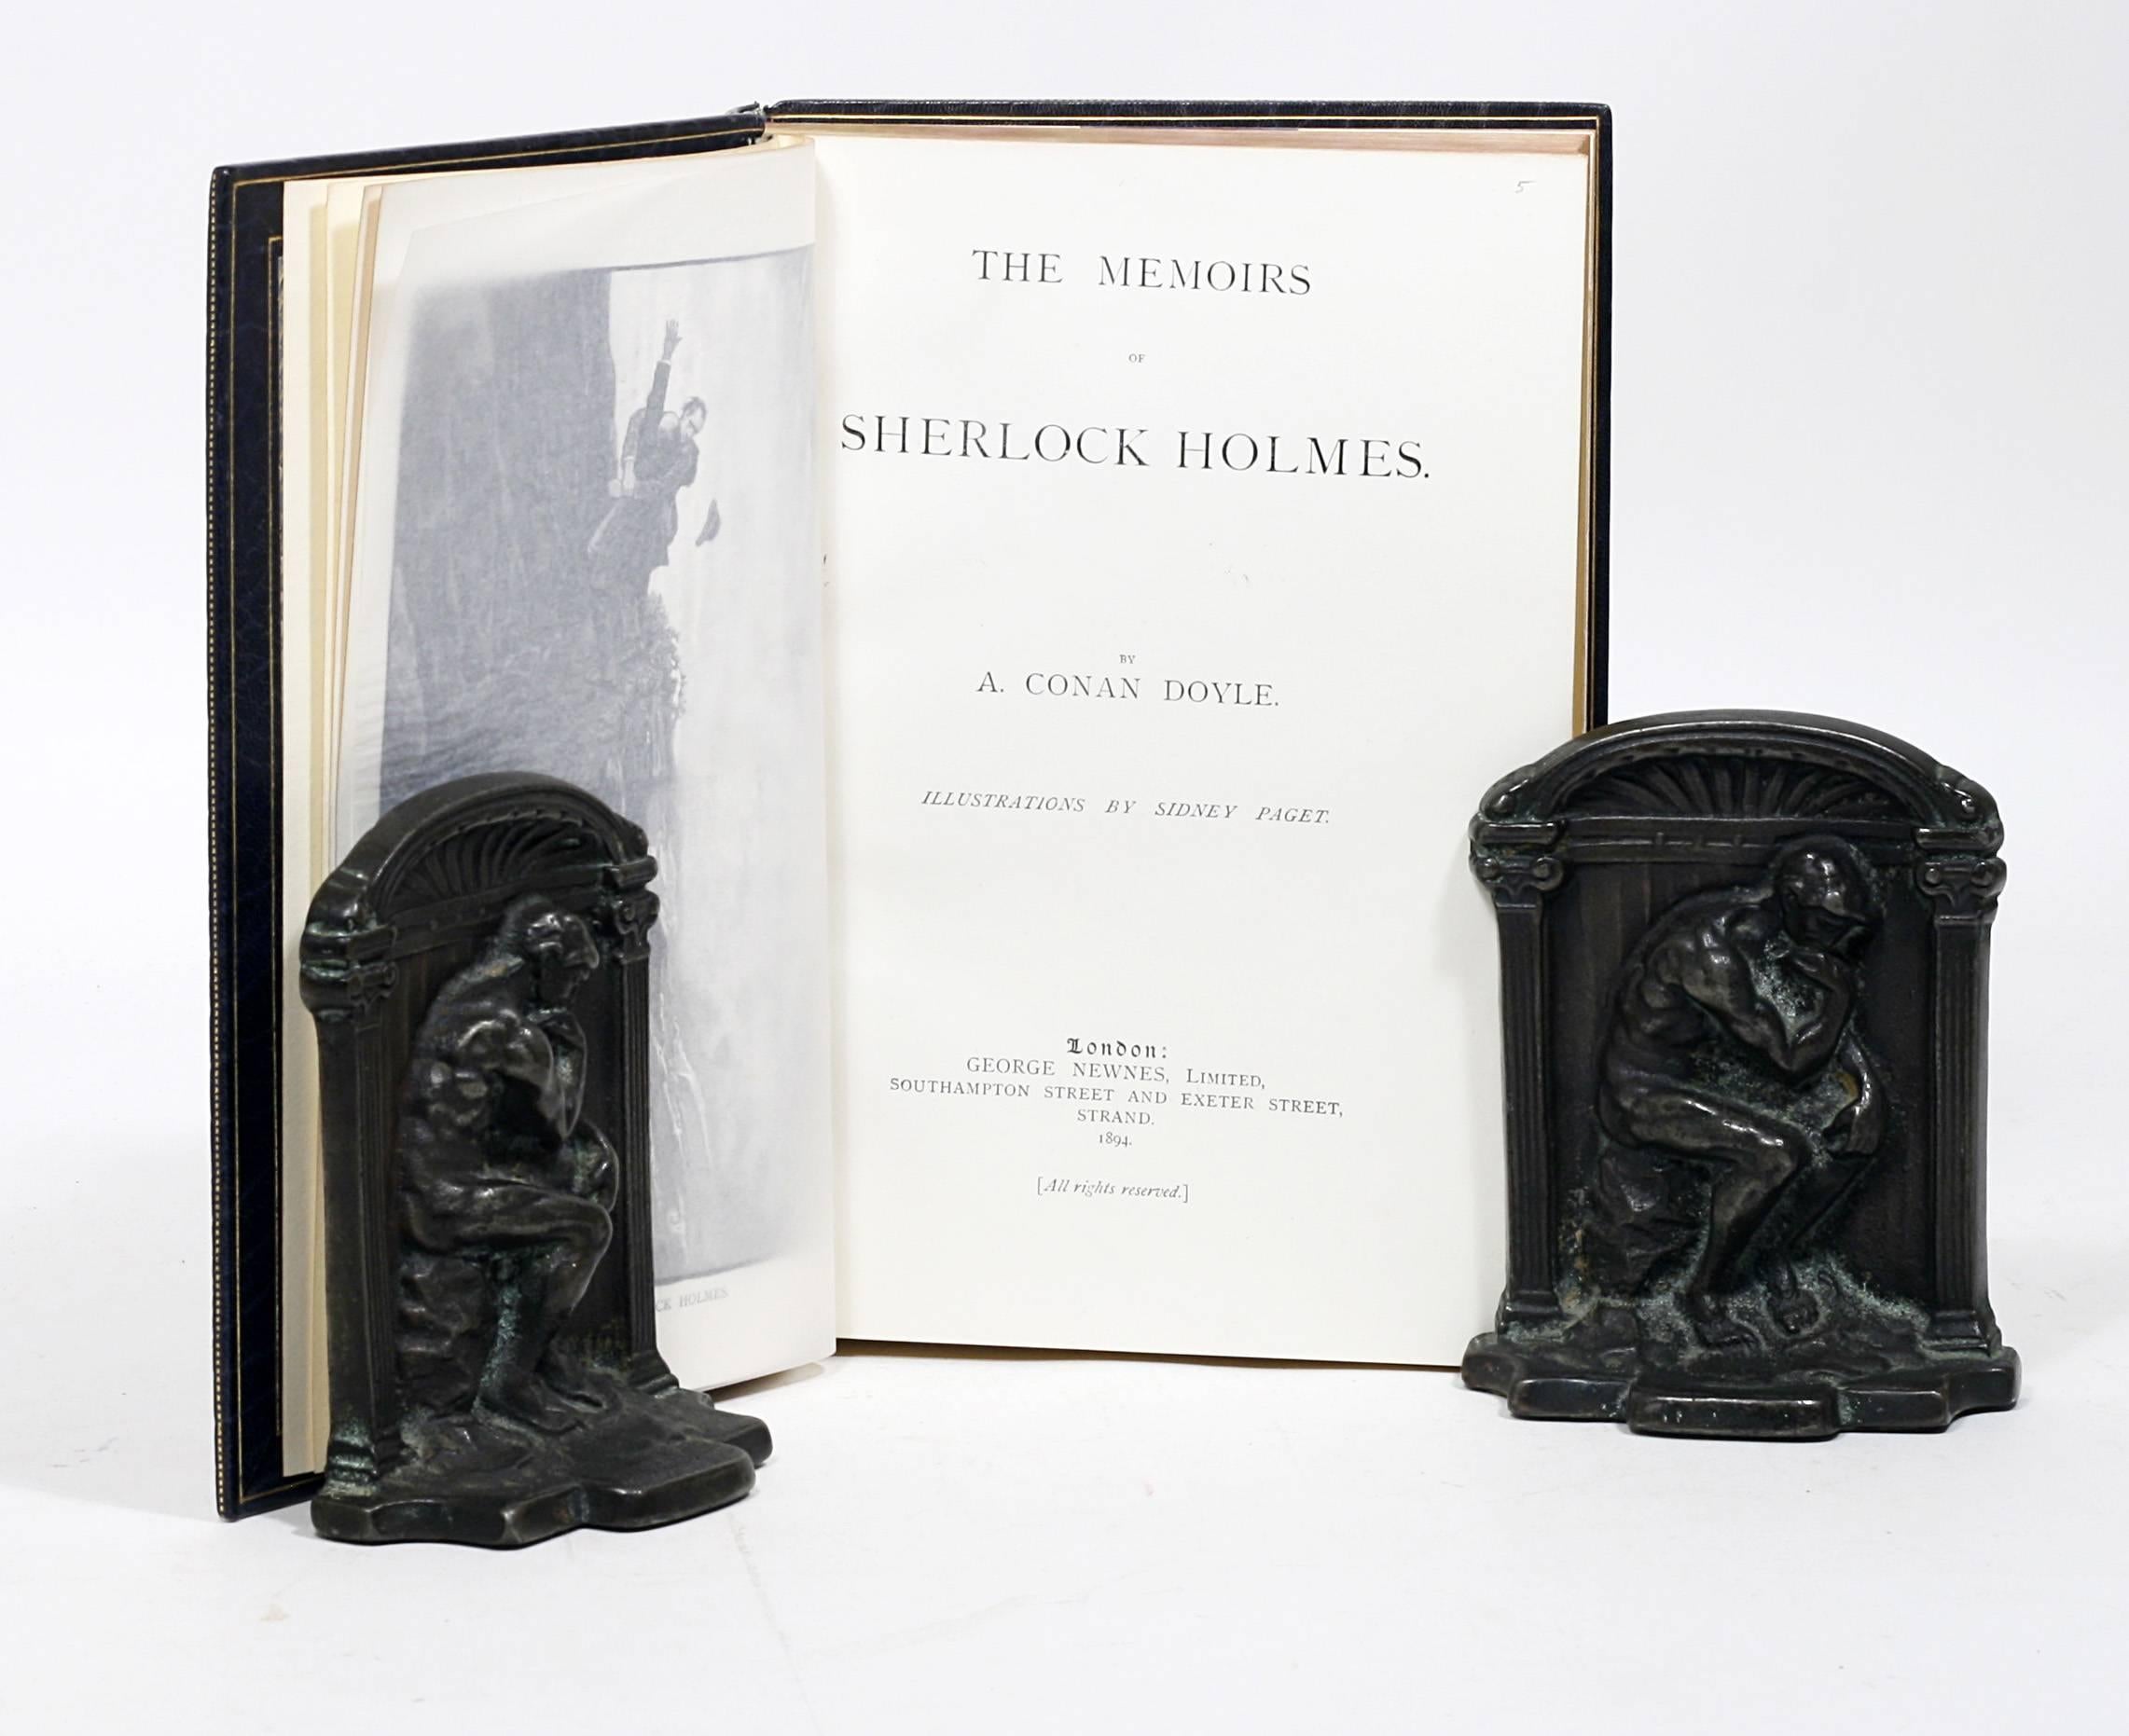 English A.C. Doyle: the Memoirs of Sherlock Holmes, First Edition in Stunning Binding